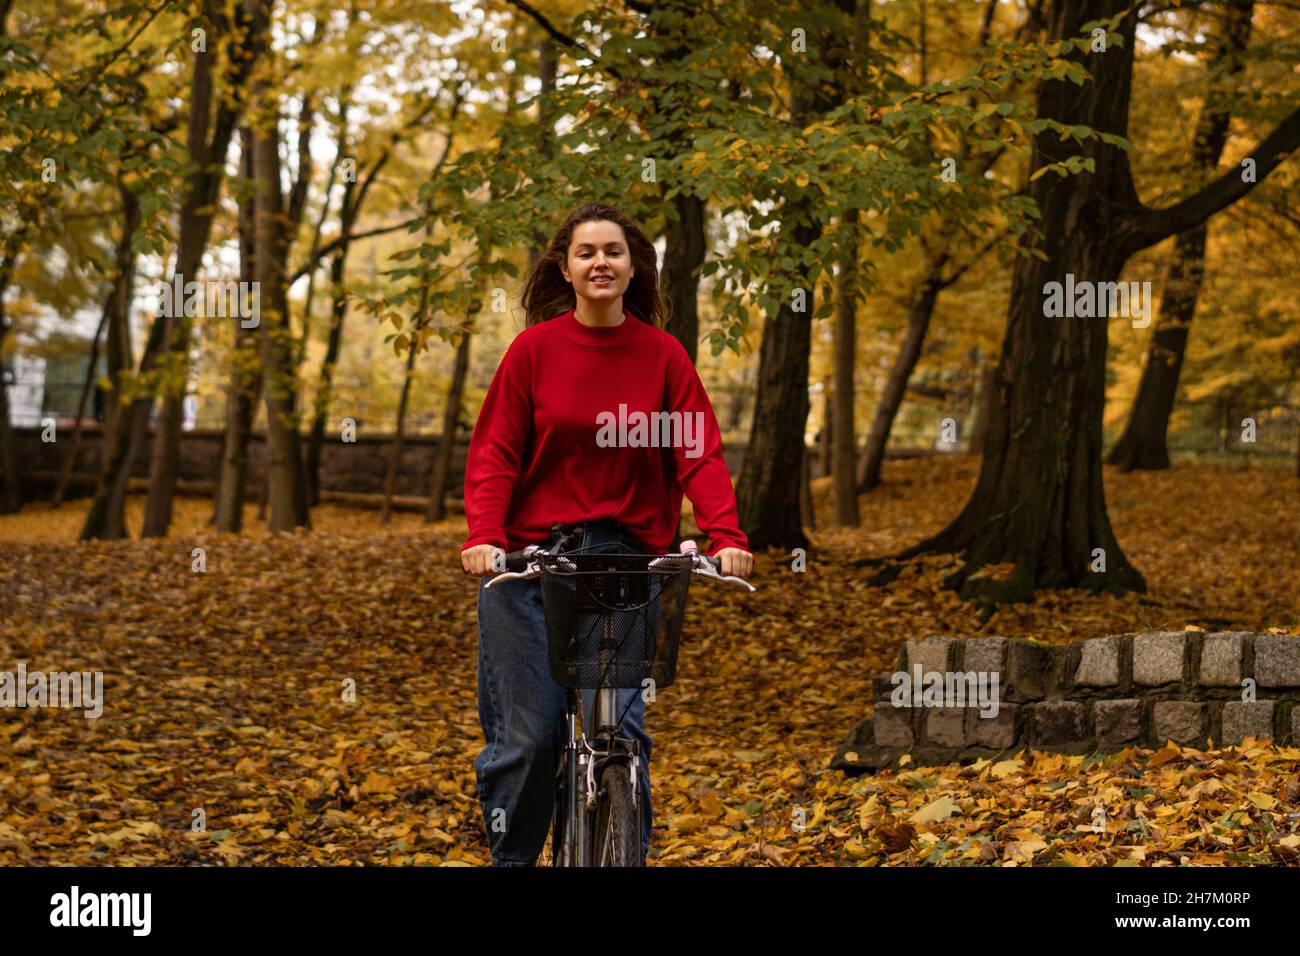 Smiling woman cycling at autumn park Stock Photo